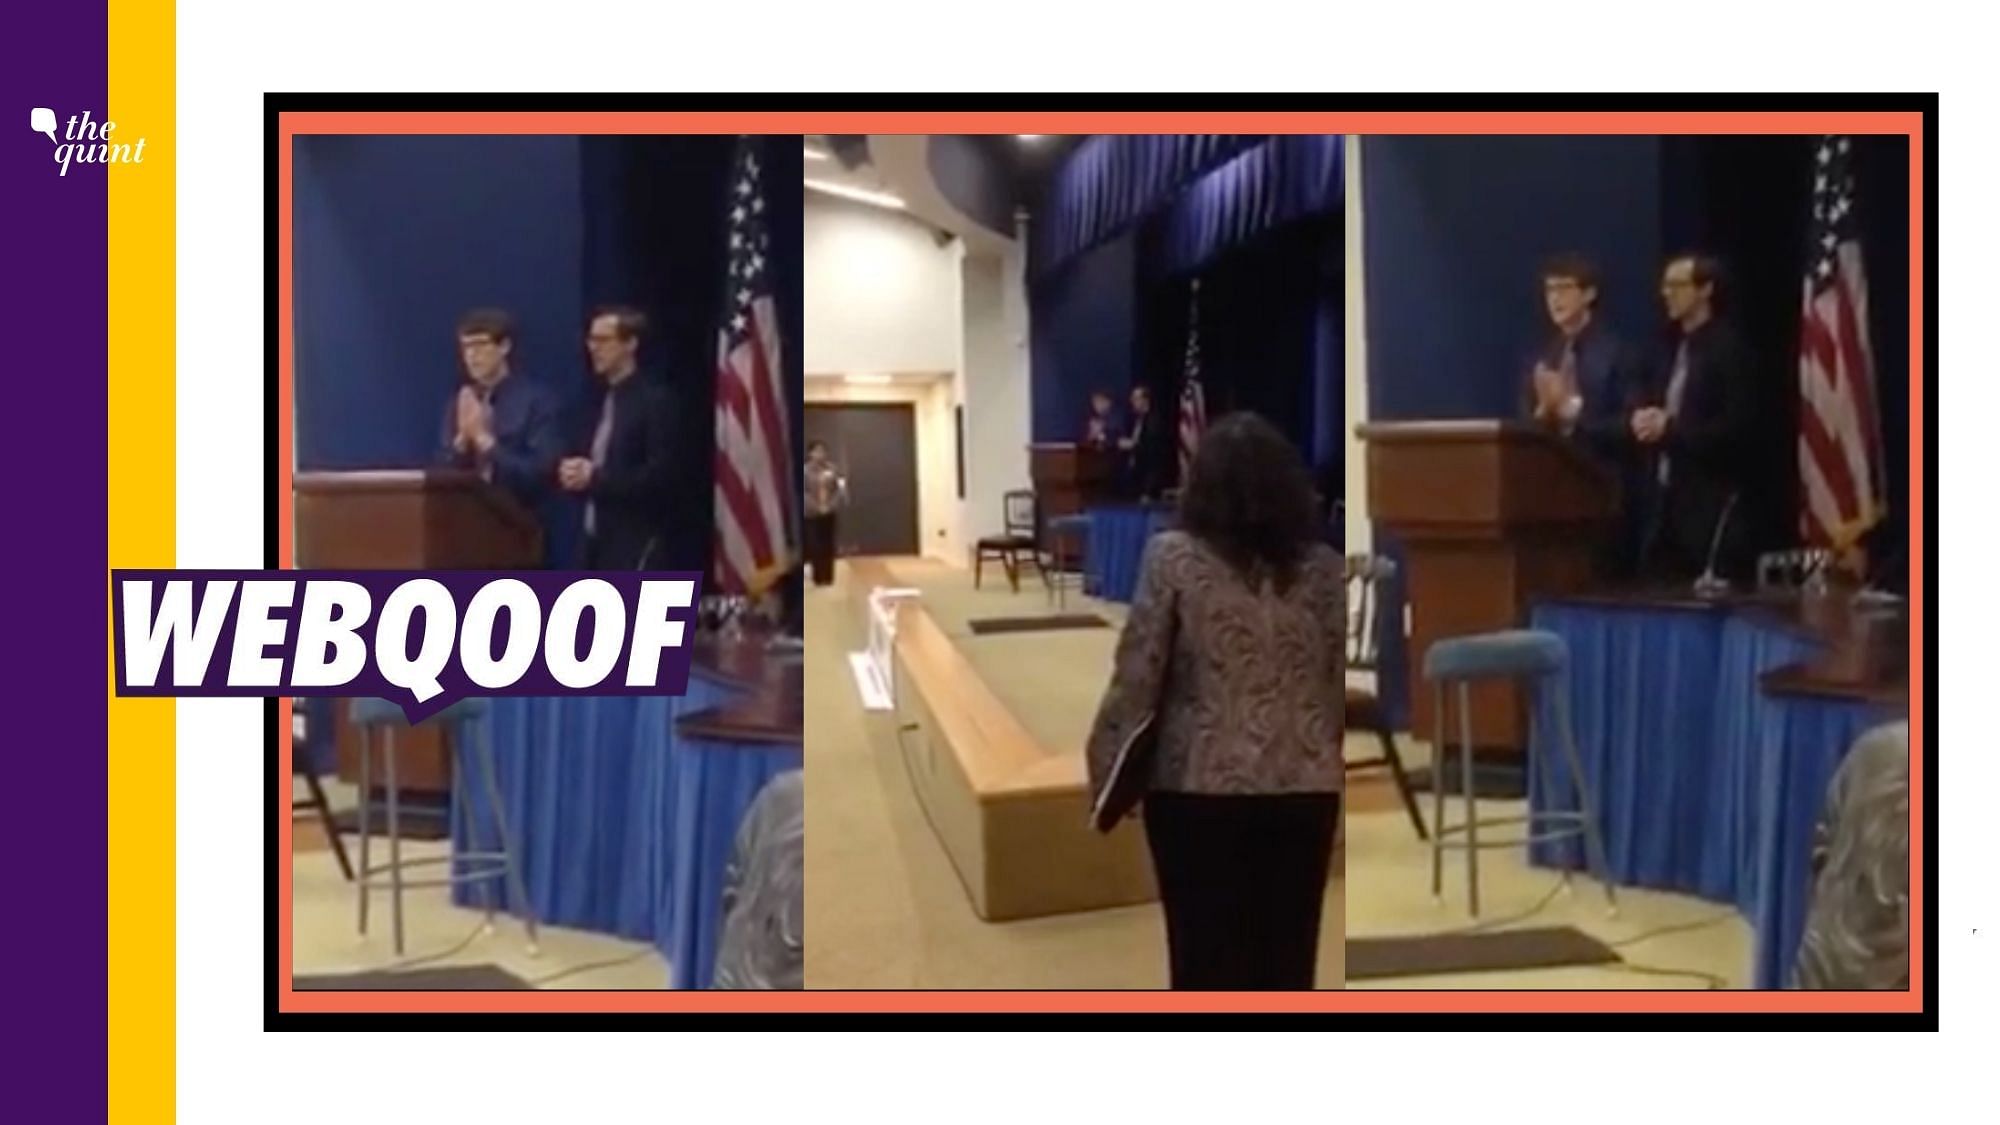 An old video has been revived to falsely claim that it is a recent video and shows Hindu shlokas being chanted for Joe Biden at the White House.